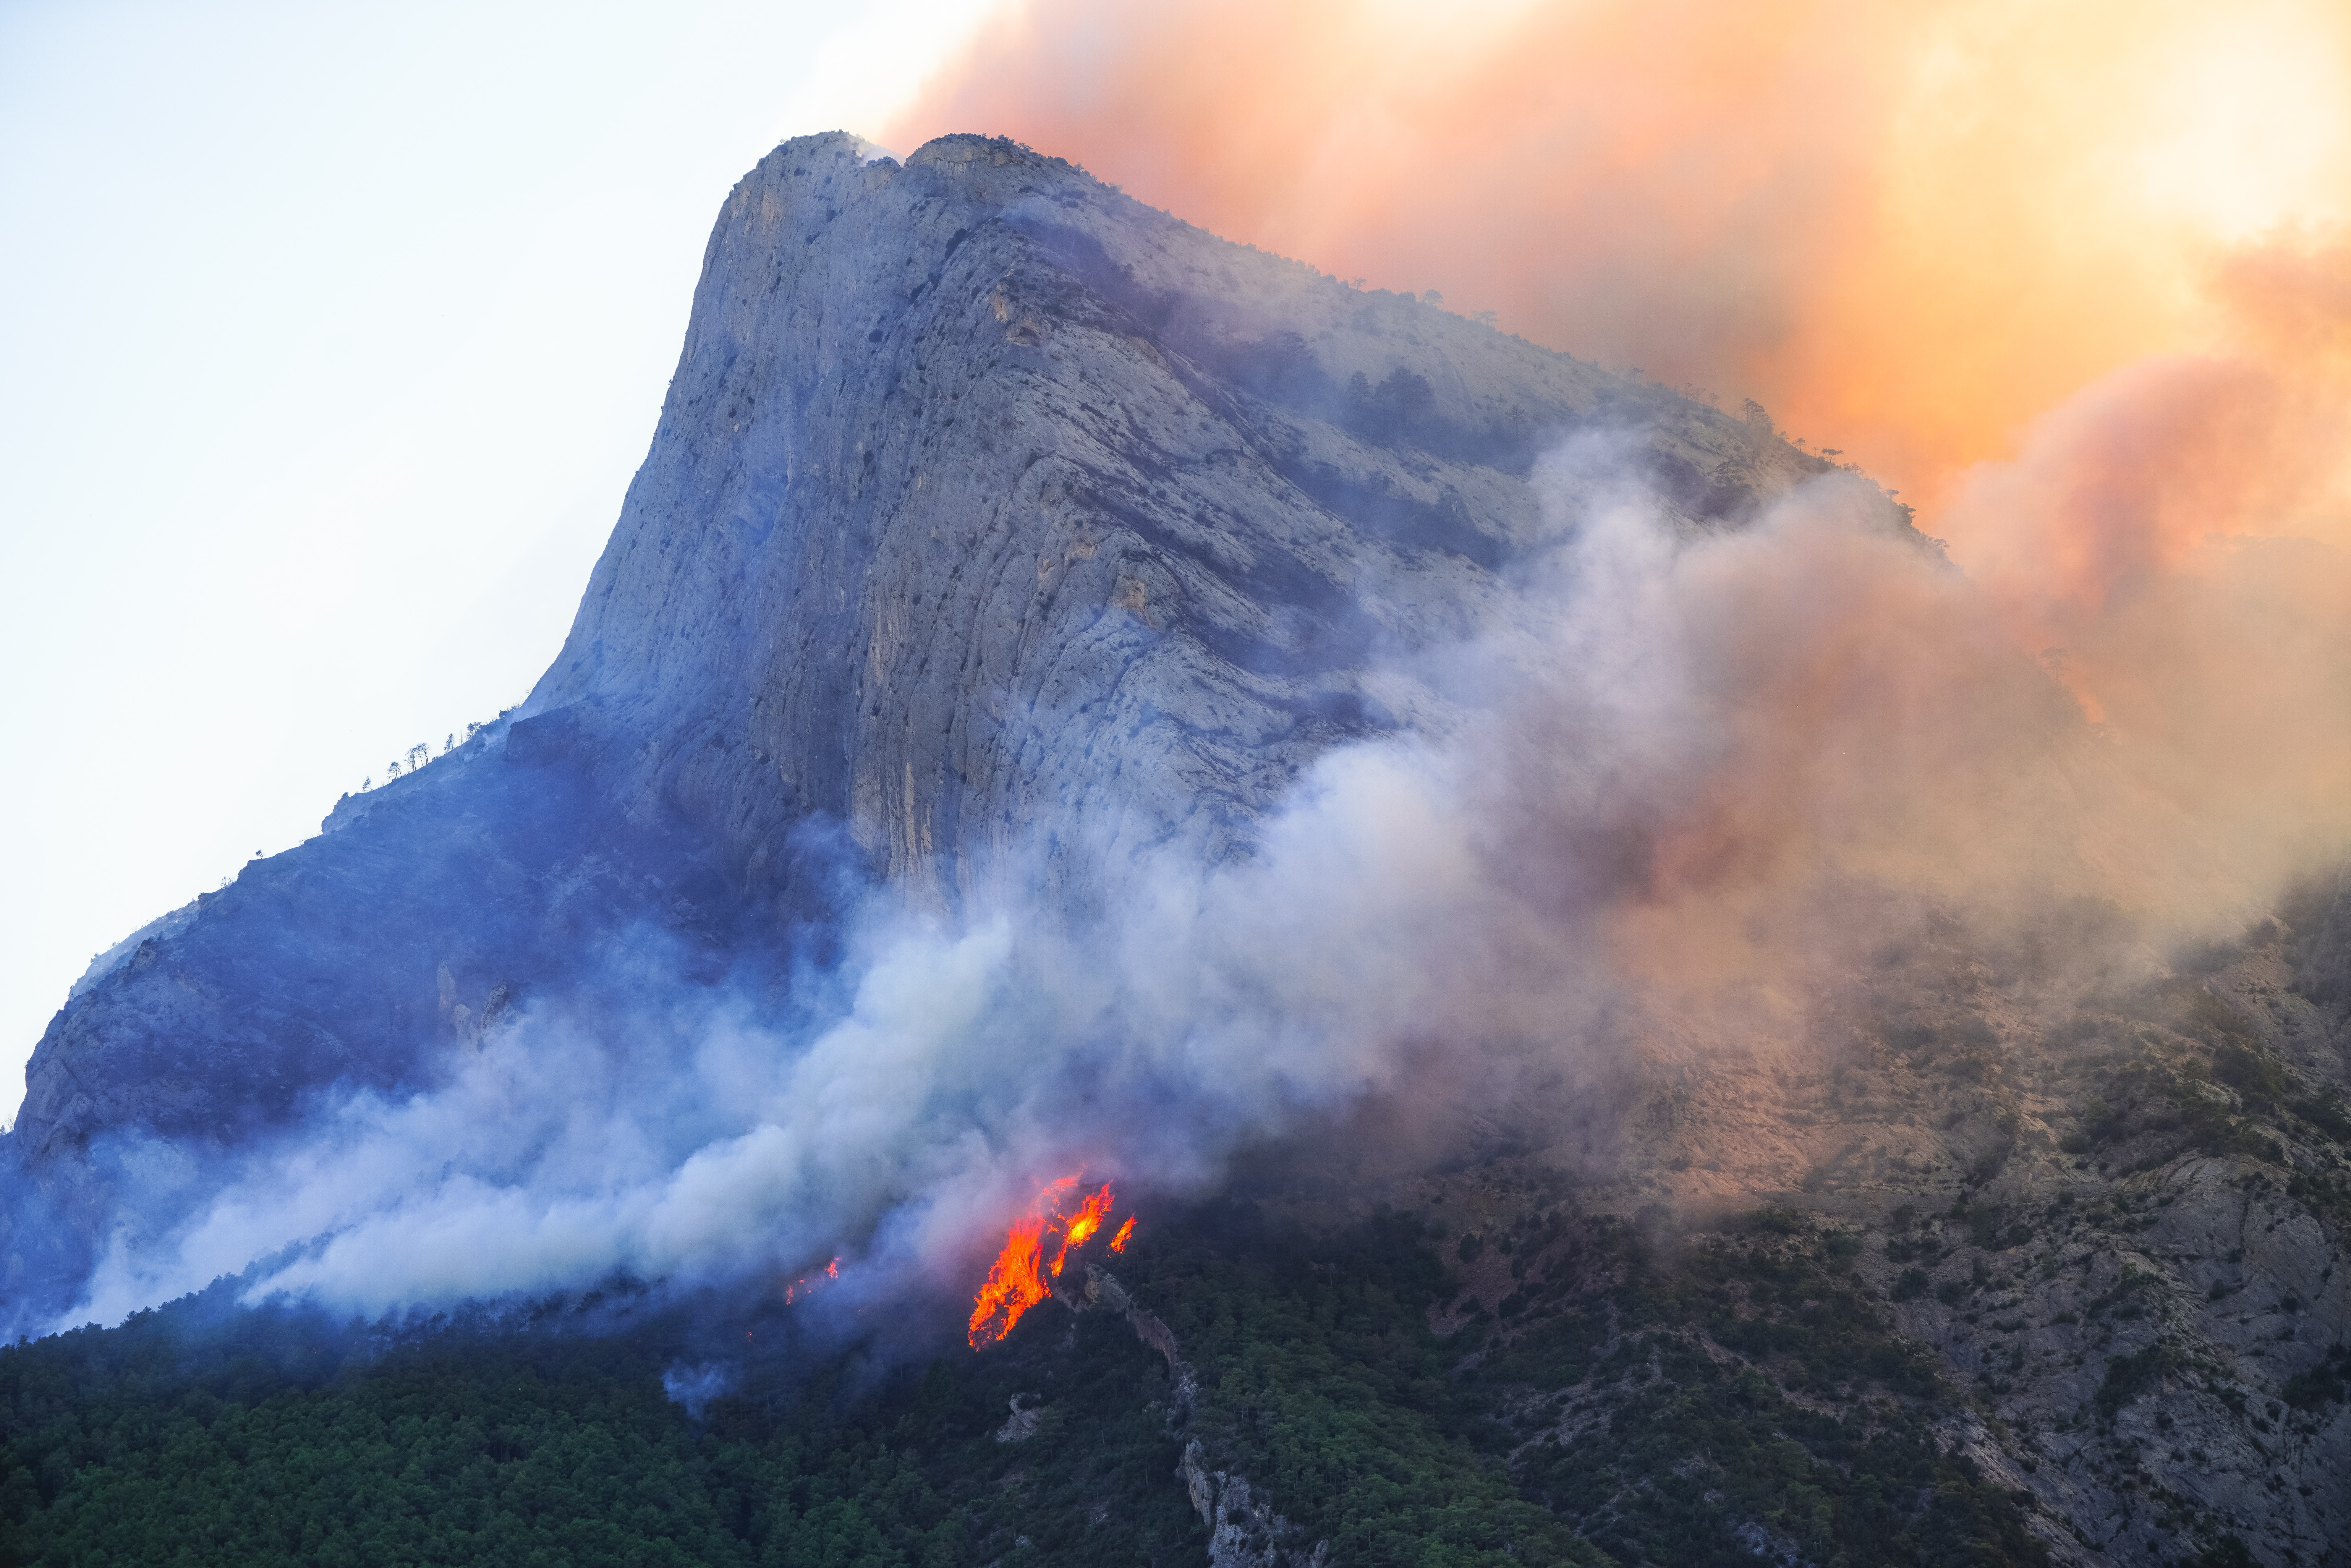 A fire on a mountain 